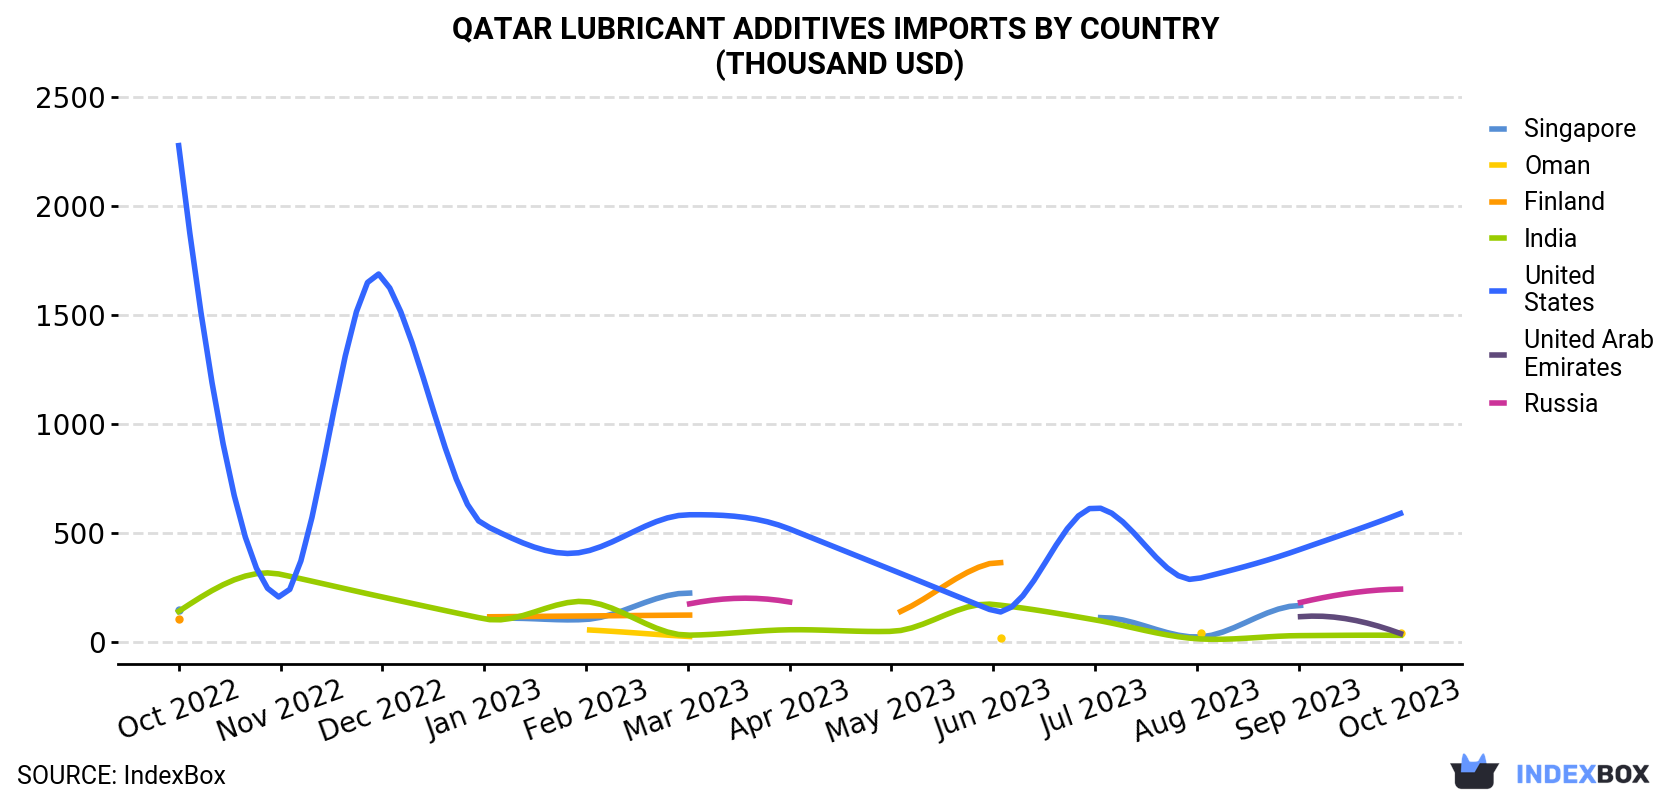 Qatar Lubricant Additives Imports By Country (Thousand USD)